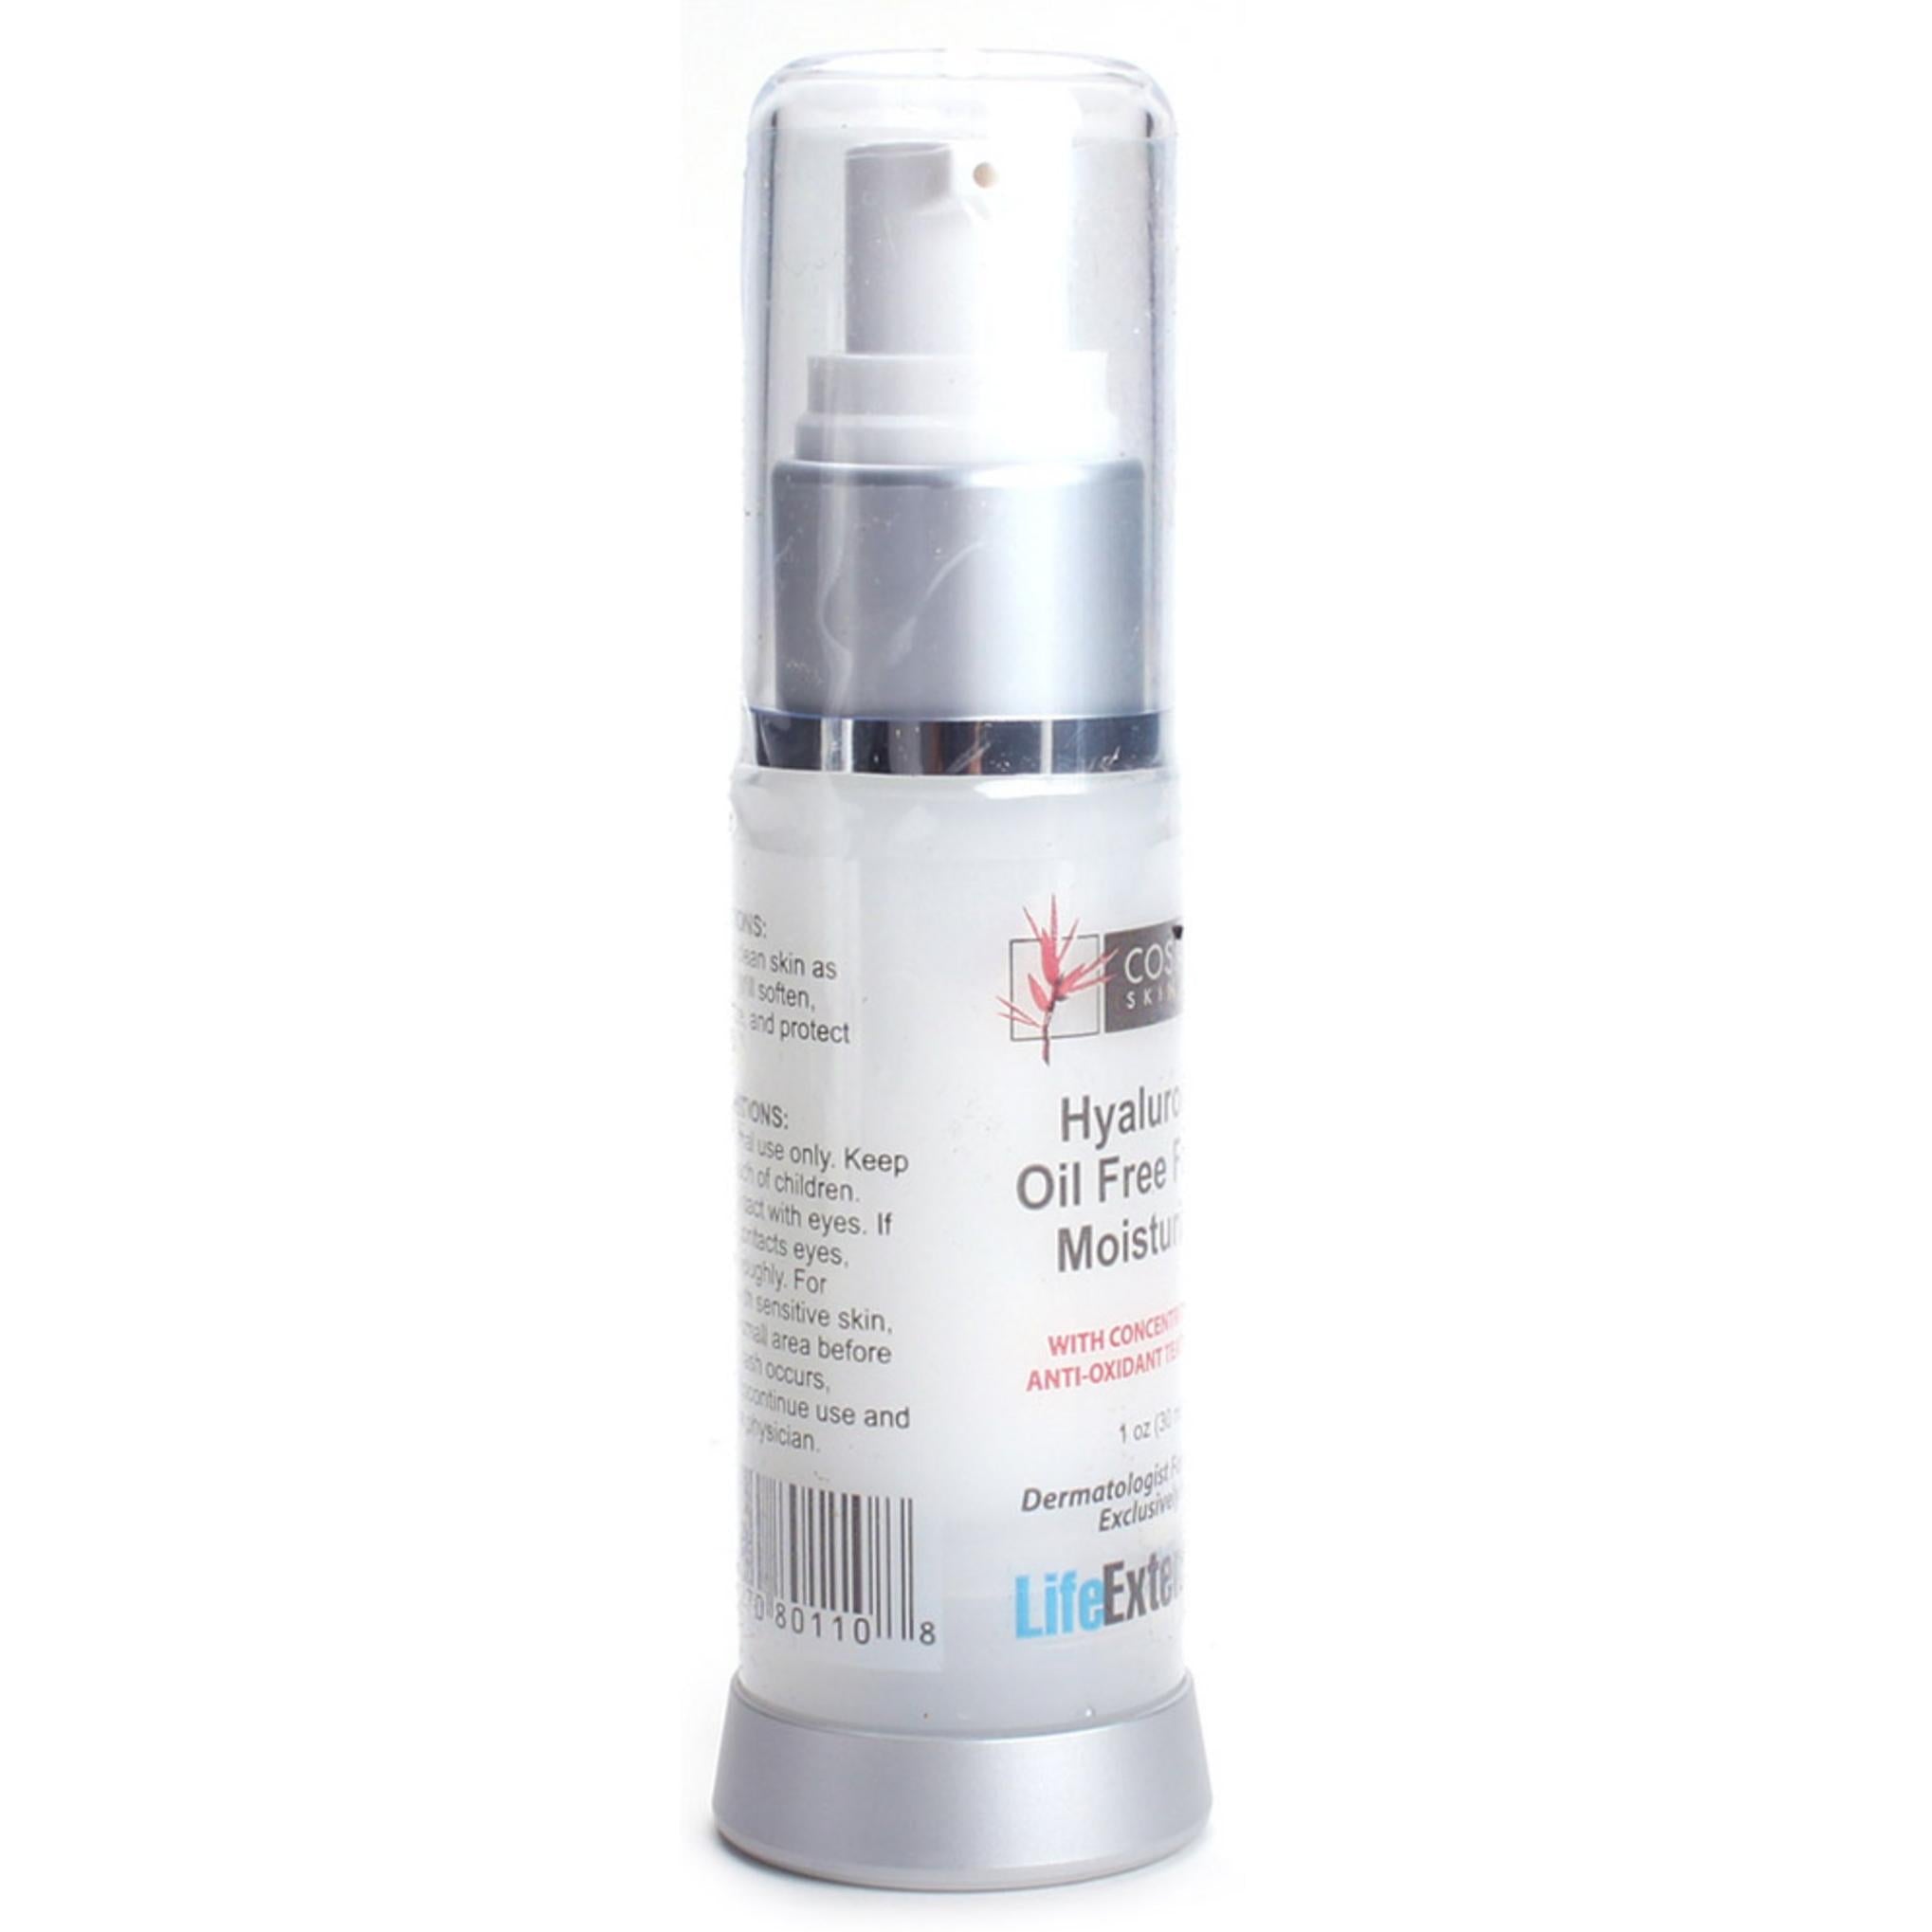 Life Extension Hyaluronic Oil Free Facial Moisturizer